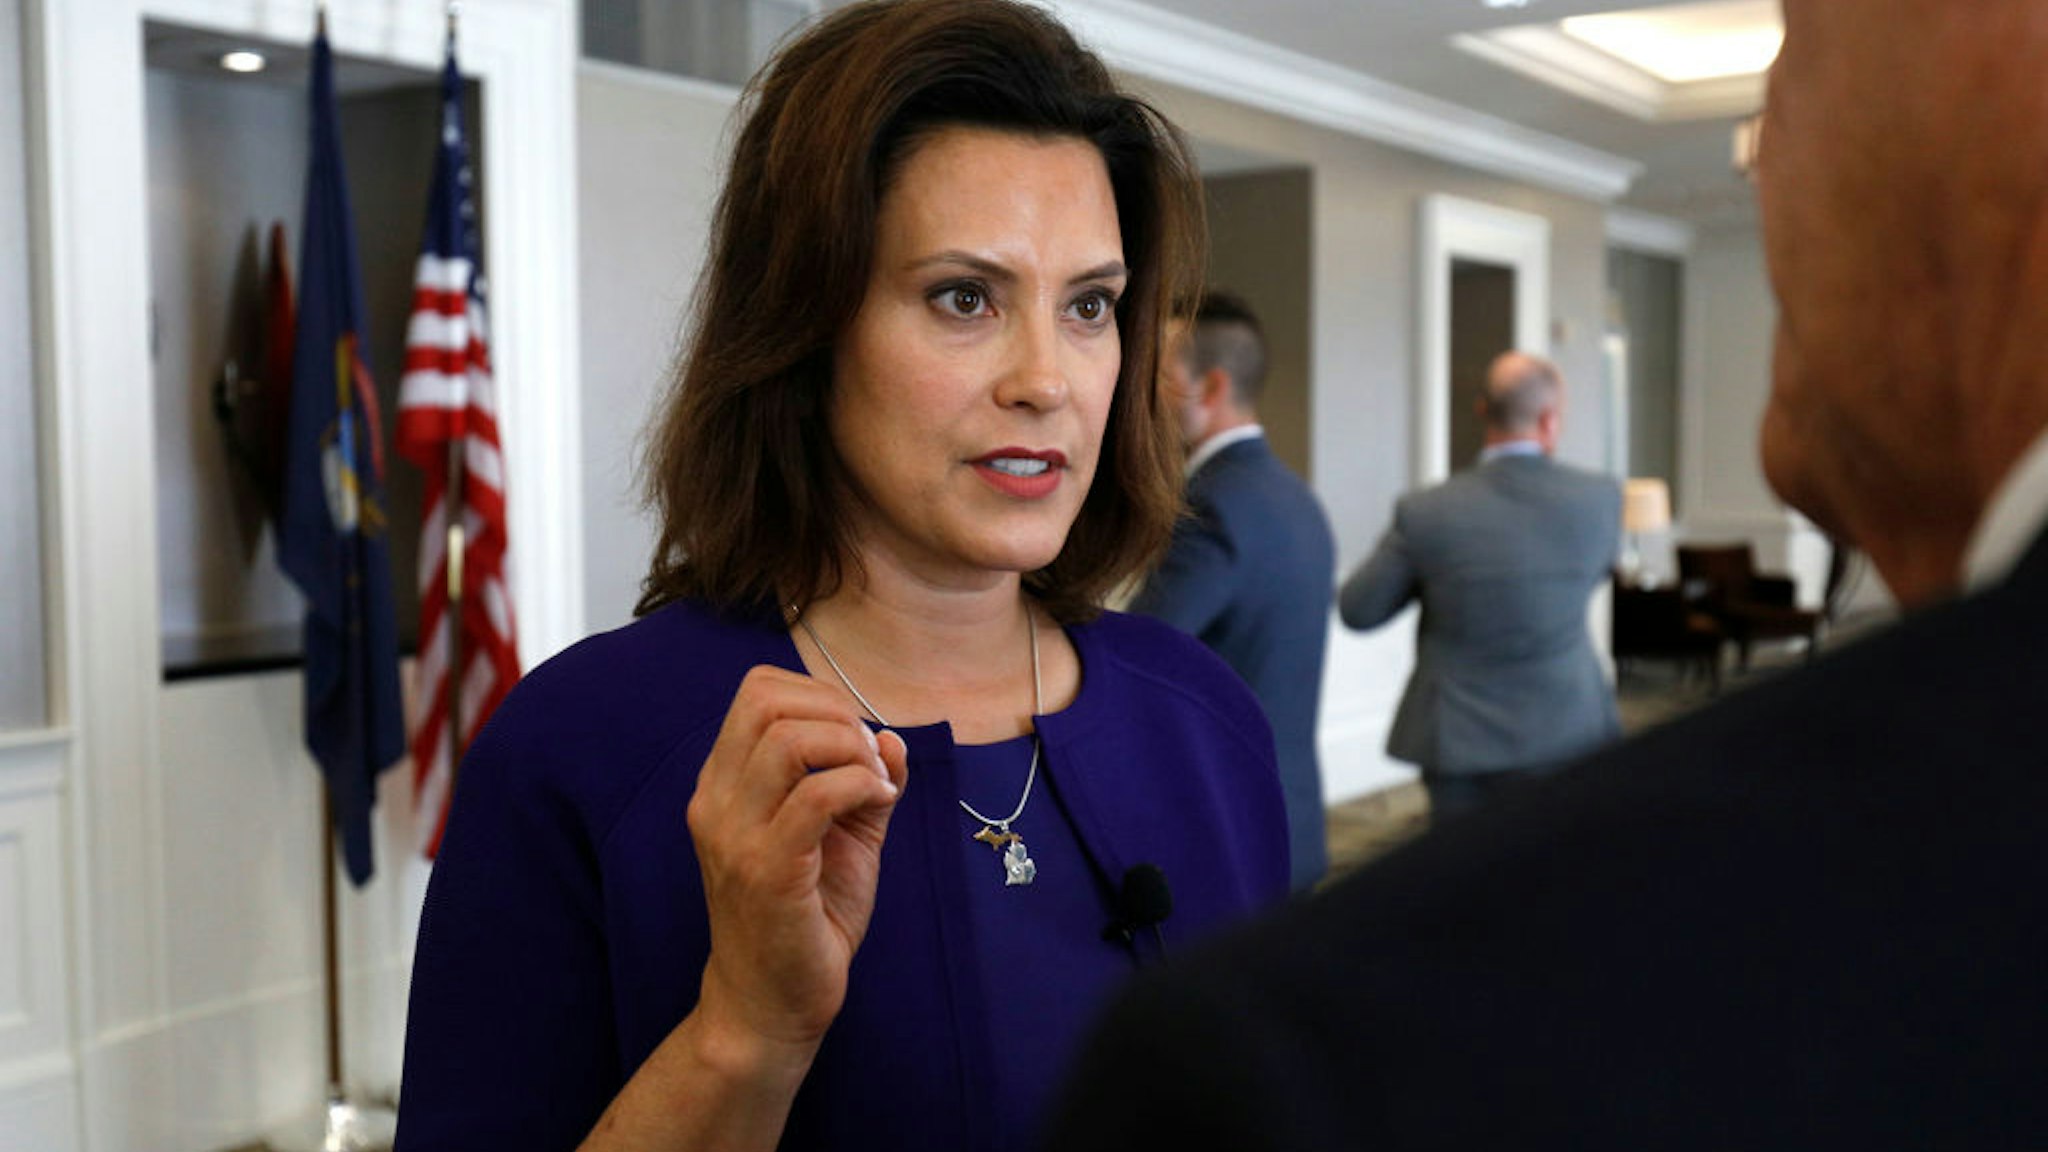 Gretchen Whitmer, Michigan Democratic gubernatorial nominee, speaks with a reporter after a Democrat Unity Rally at the Westin Book Cadillac Hotel August 8, 2018 in Detroit, Michigan.